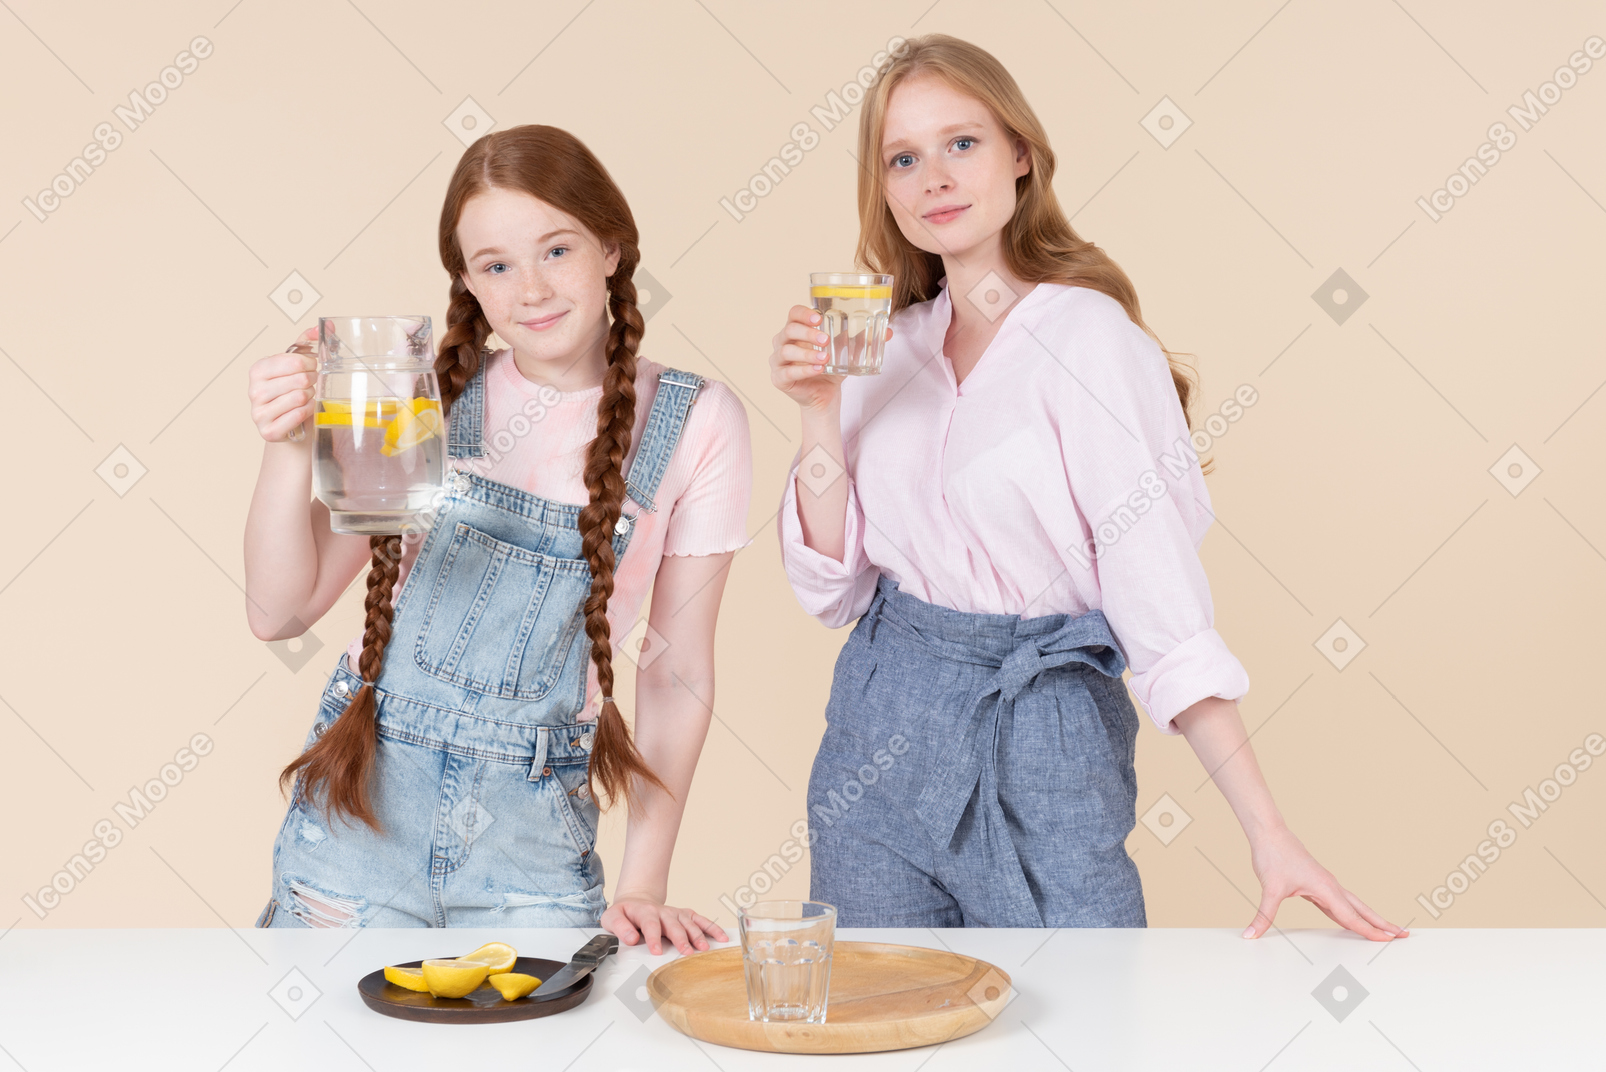 Two young girls holding lemon water